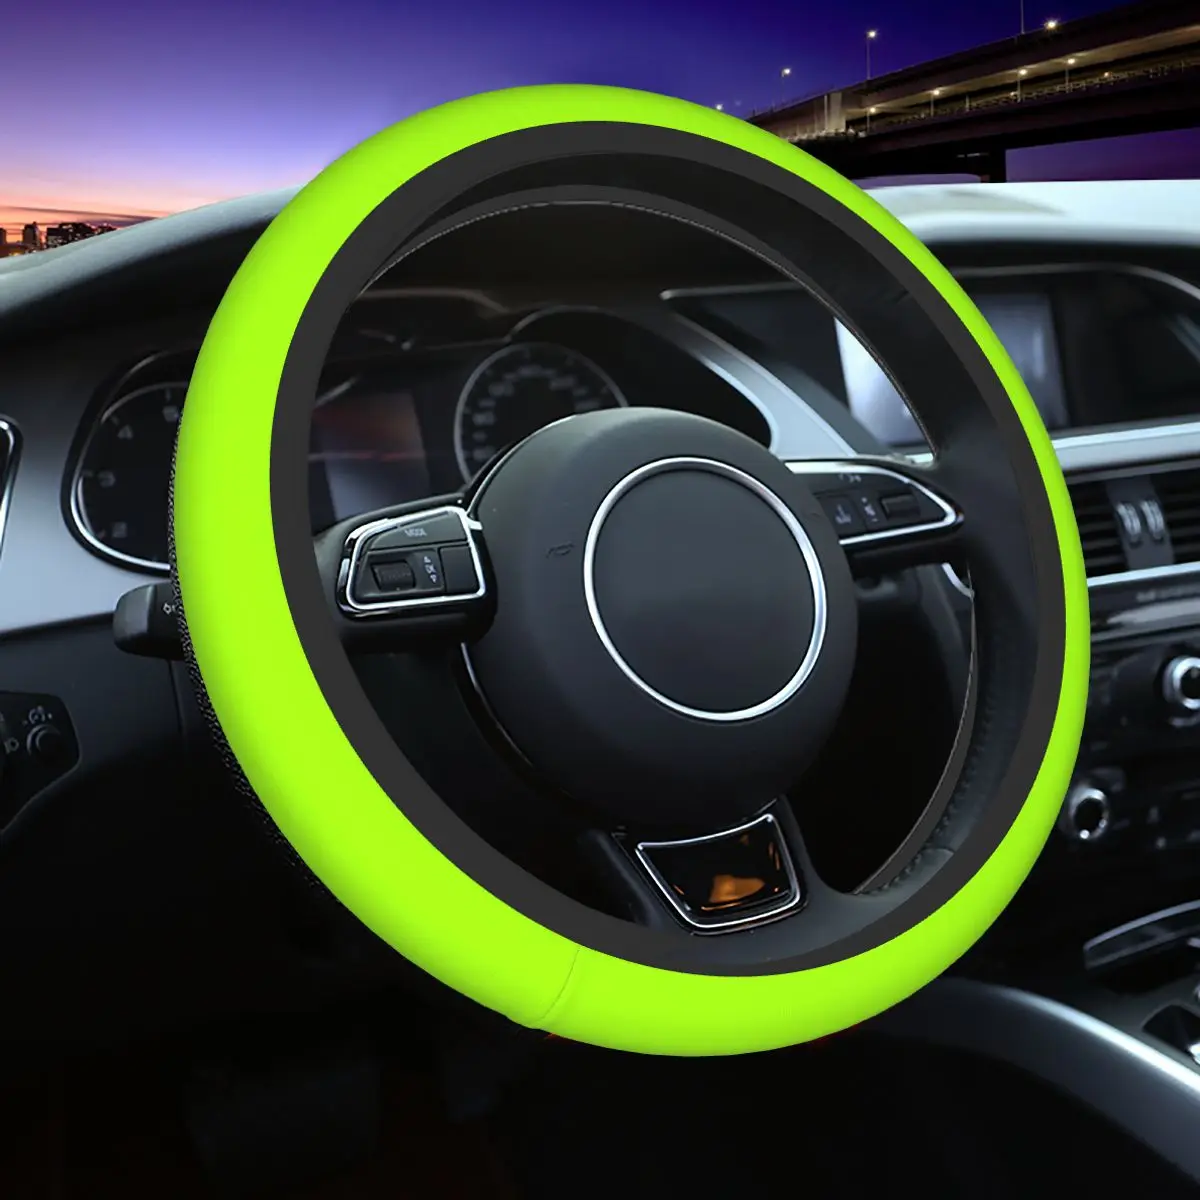 

Grass Green Car Steering Wheel Cover 37-38 Anti-slip Solid Color Steering Wheel Protective Cover Auto Decoration Car Accessories